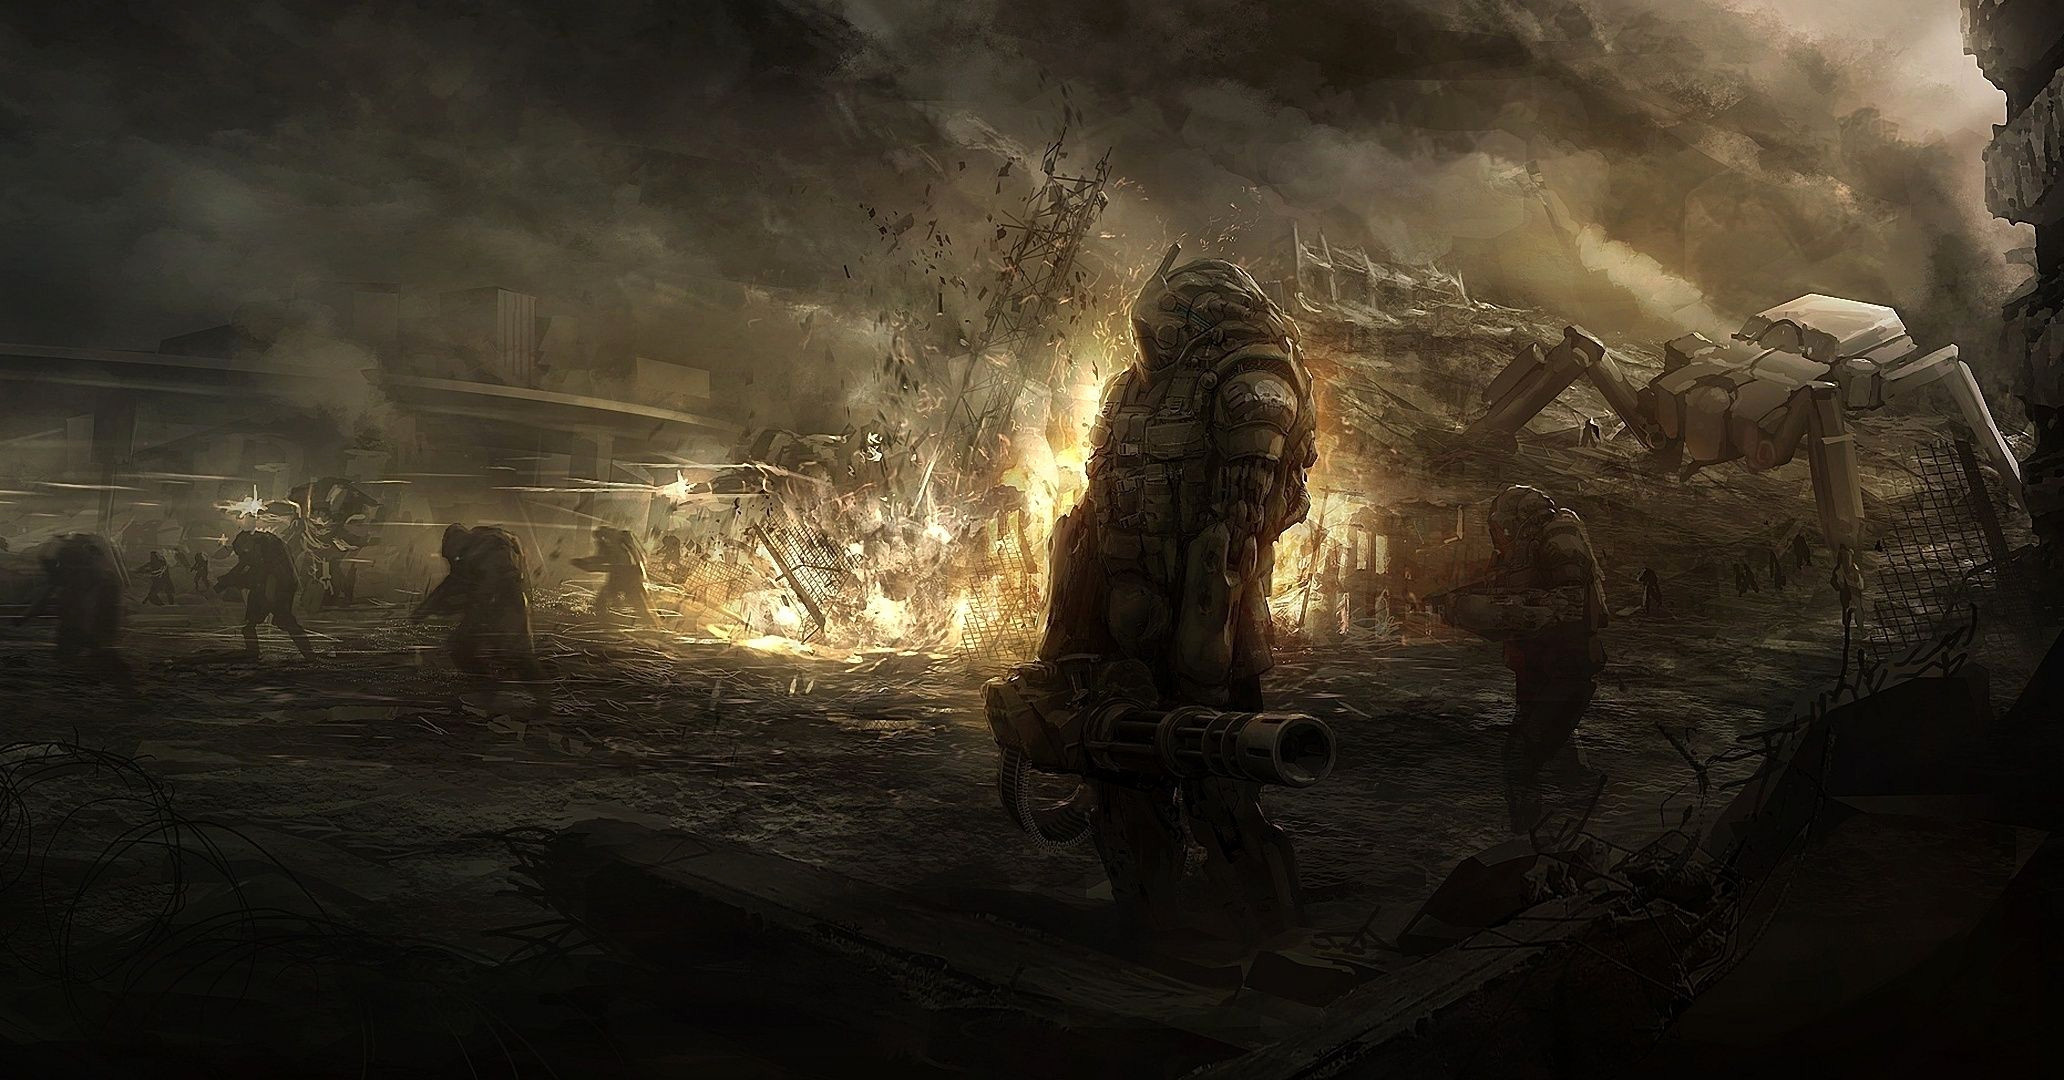 dystopia wallpaper,action adventure game,strategy video game,pc game,darkness,cg artwork